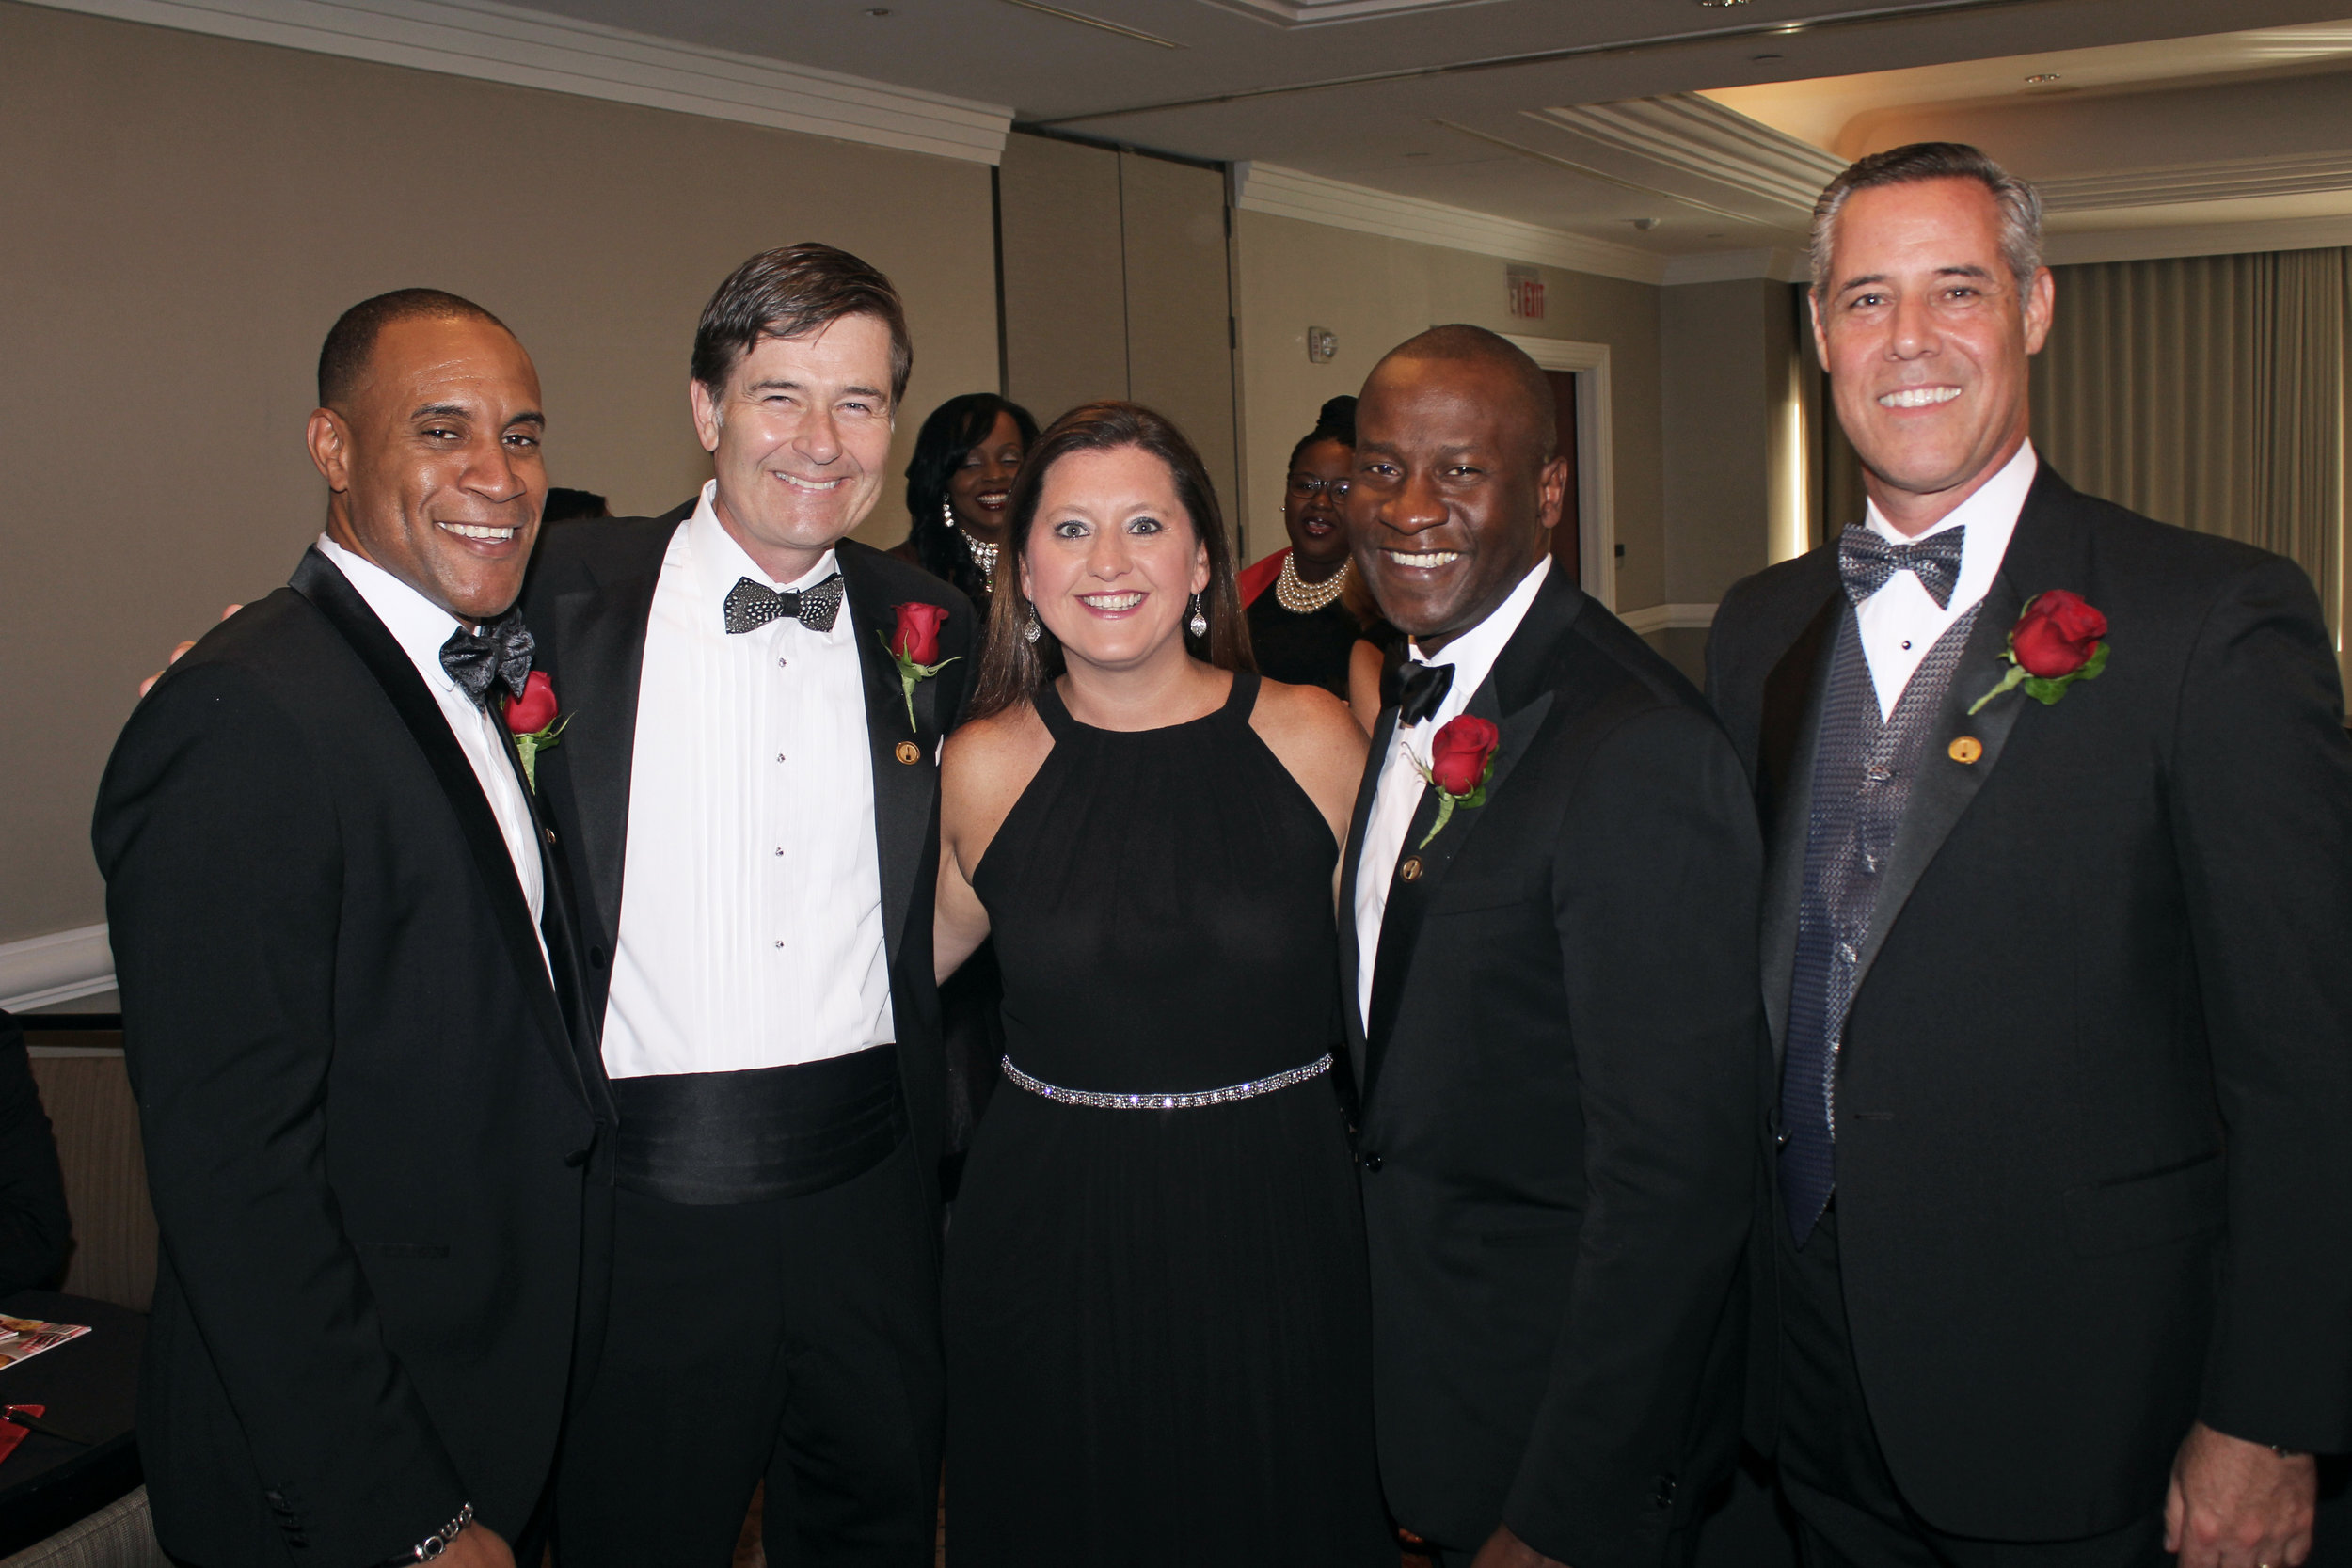  Christina Bickley with the American Diabetes Association in Charlotte surrounded by the Fathers of the Year.  